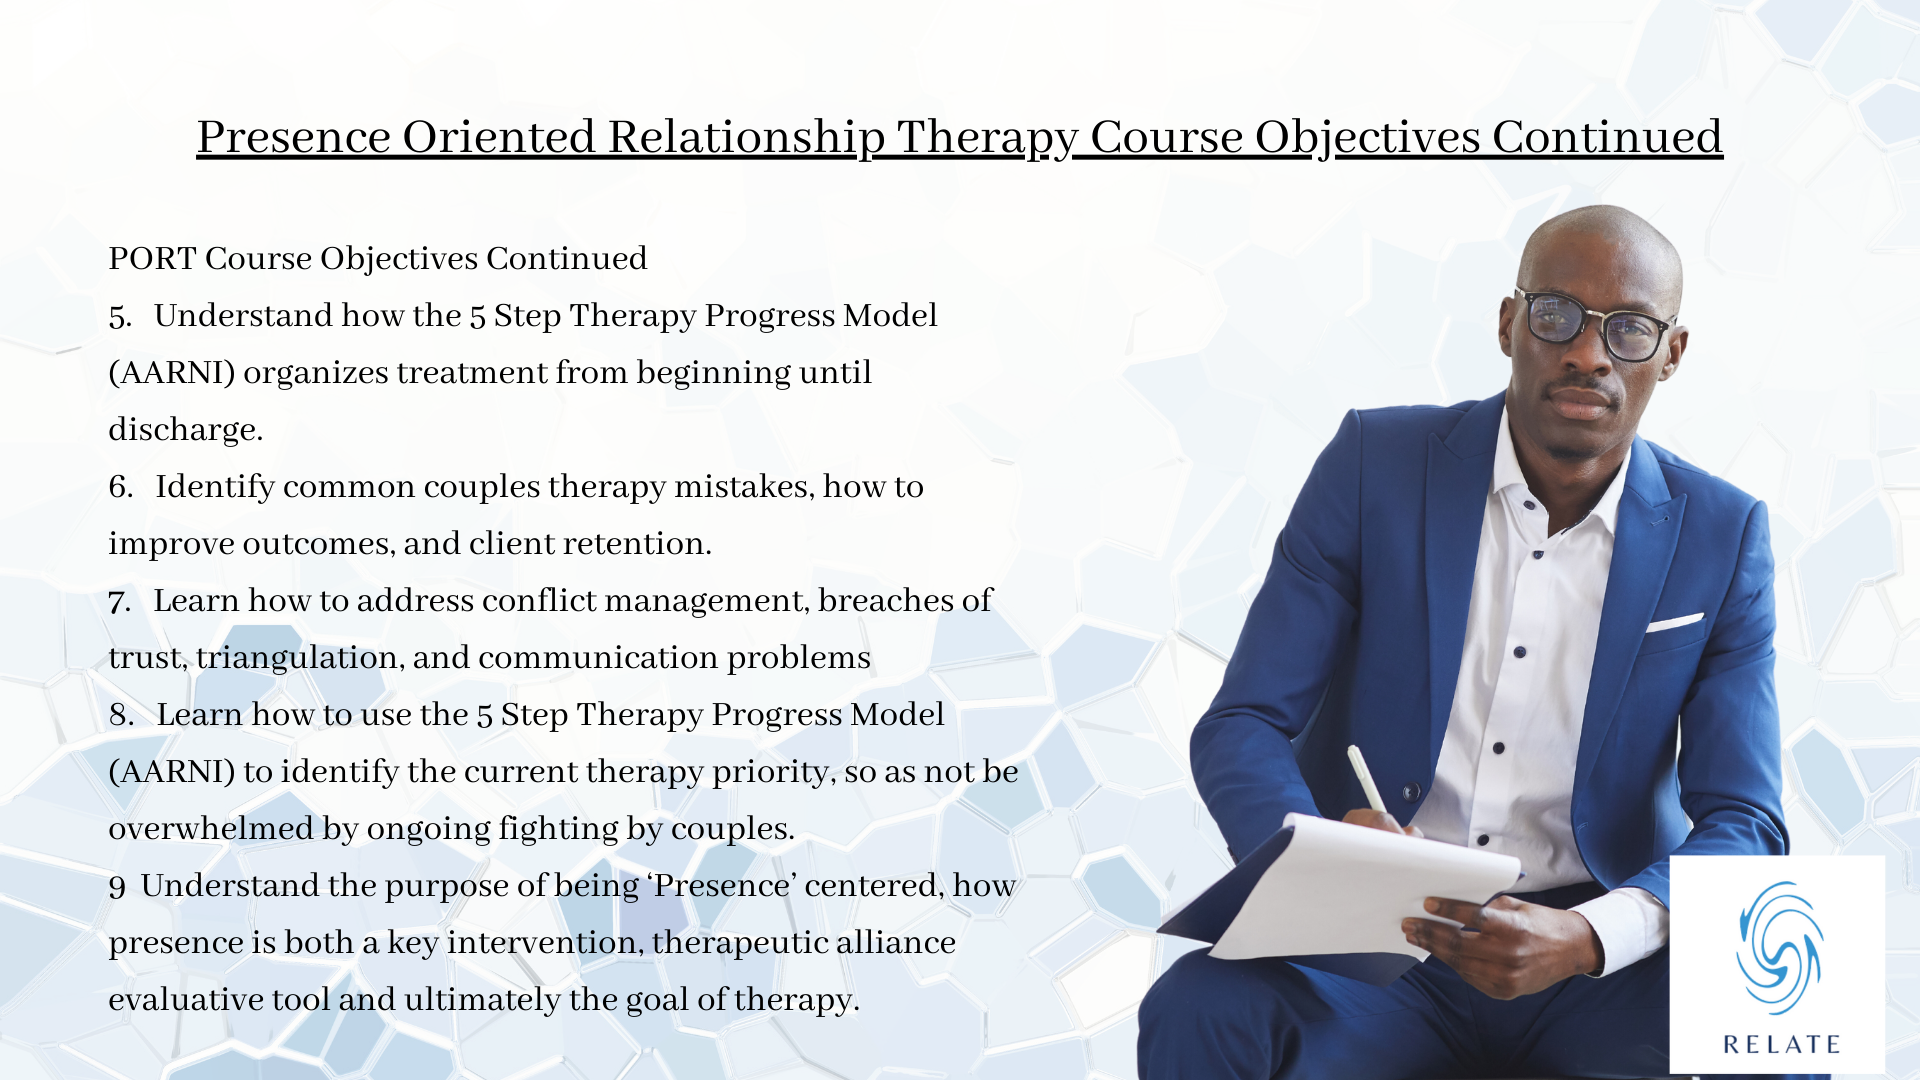 PORT: Presence Oriented Relationship Therapy